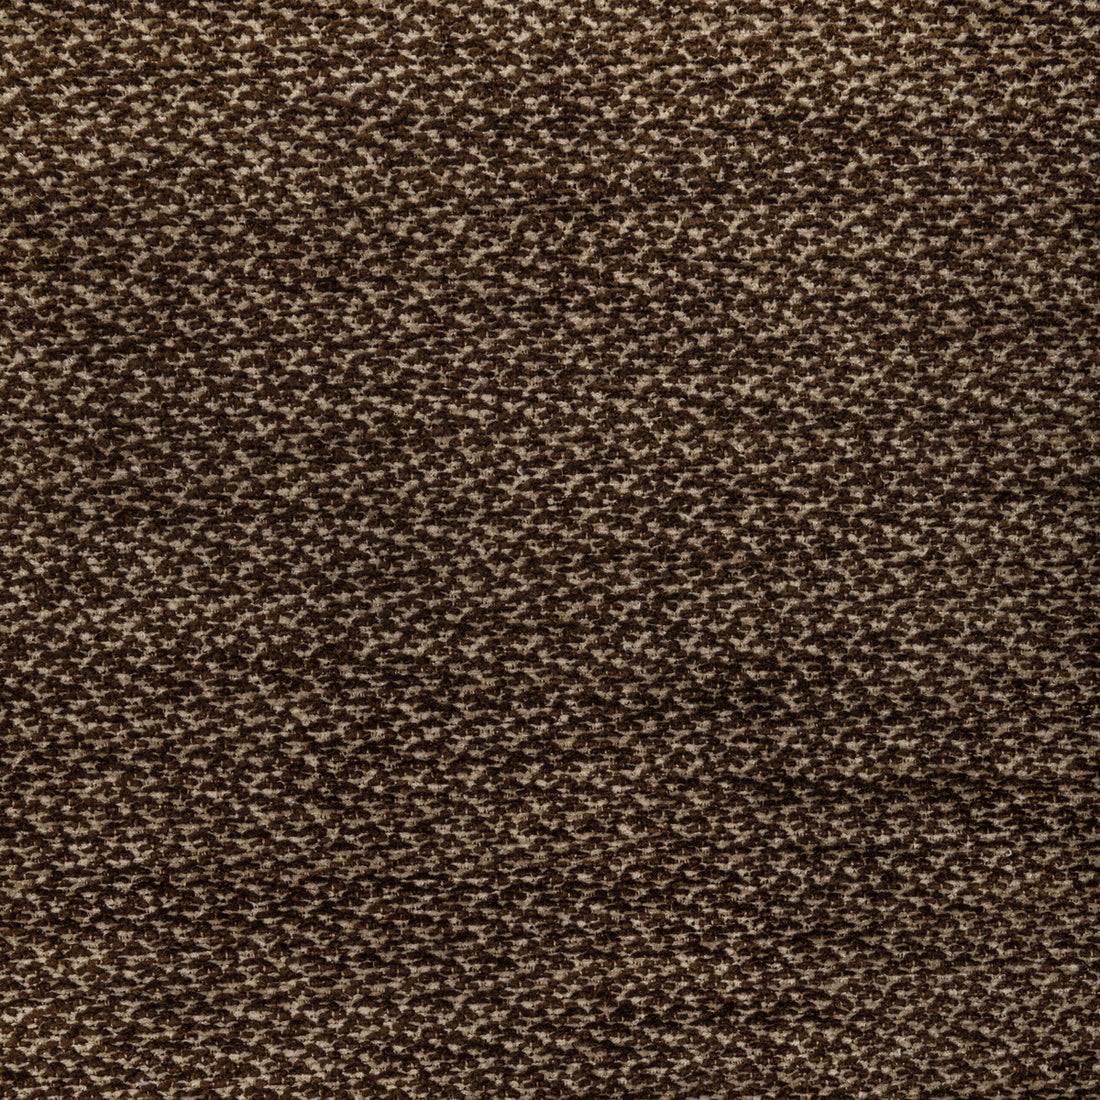 Sasson Texture fabric in sable color - pattern 8022122.1616.0 - by Brunschwig &amp; Fils in the Chambery Textures III collection